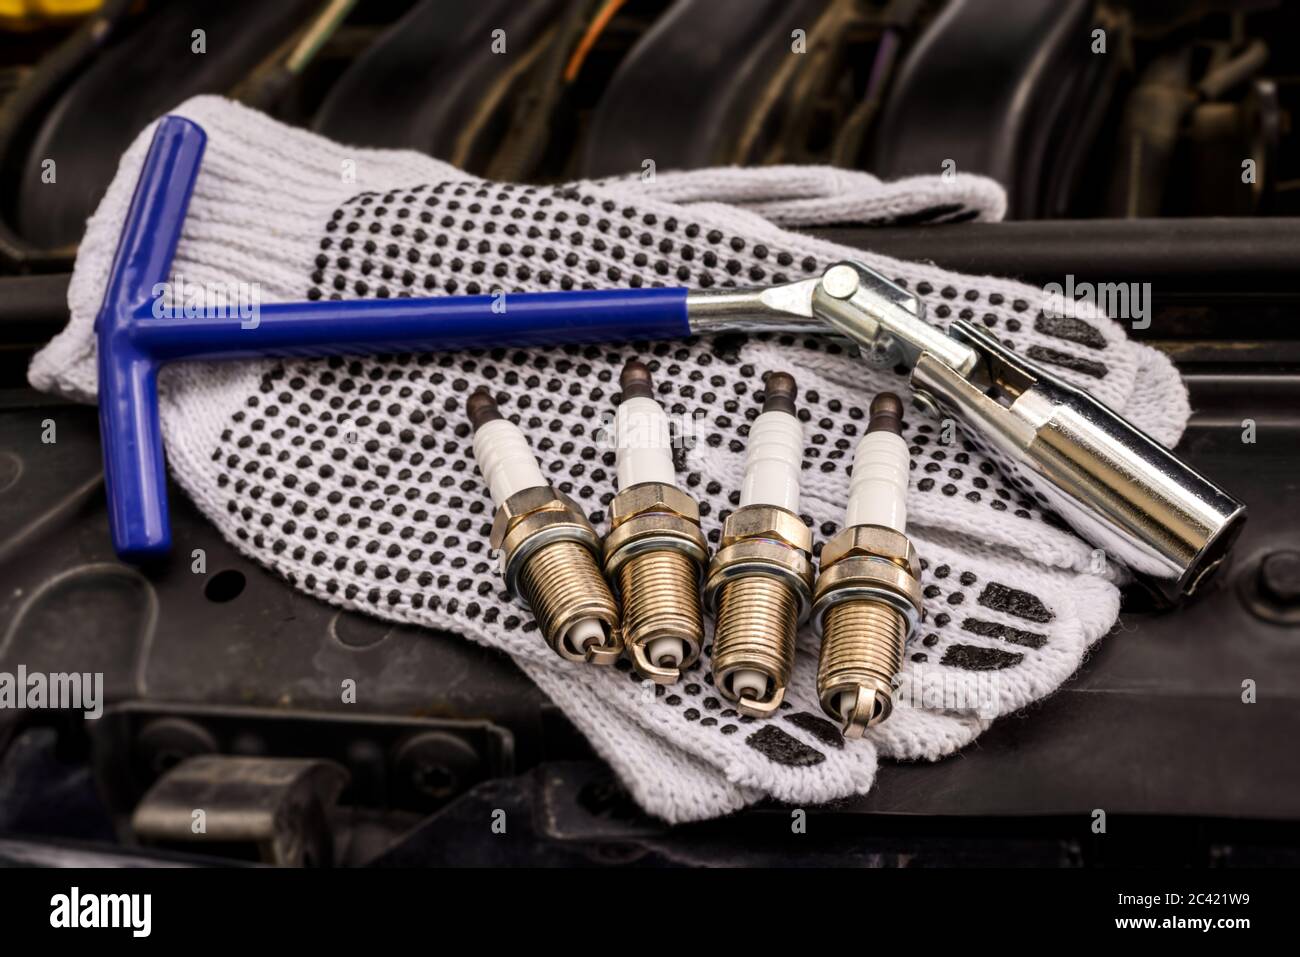 Sparking plugs, spark plug key and protective gloves under the hood of the car. Stock Photo